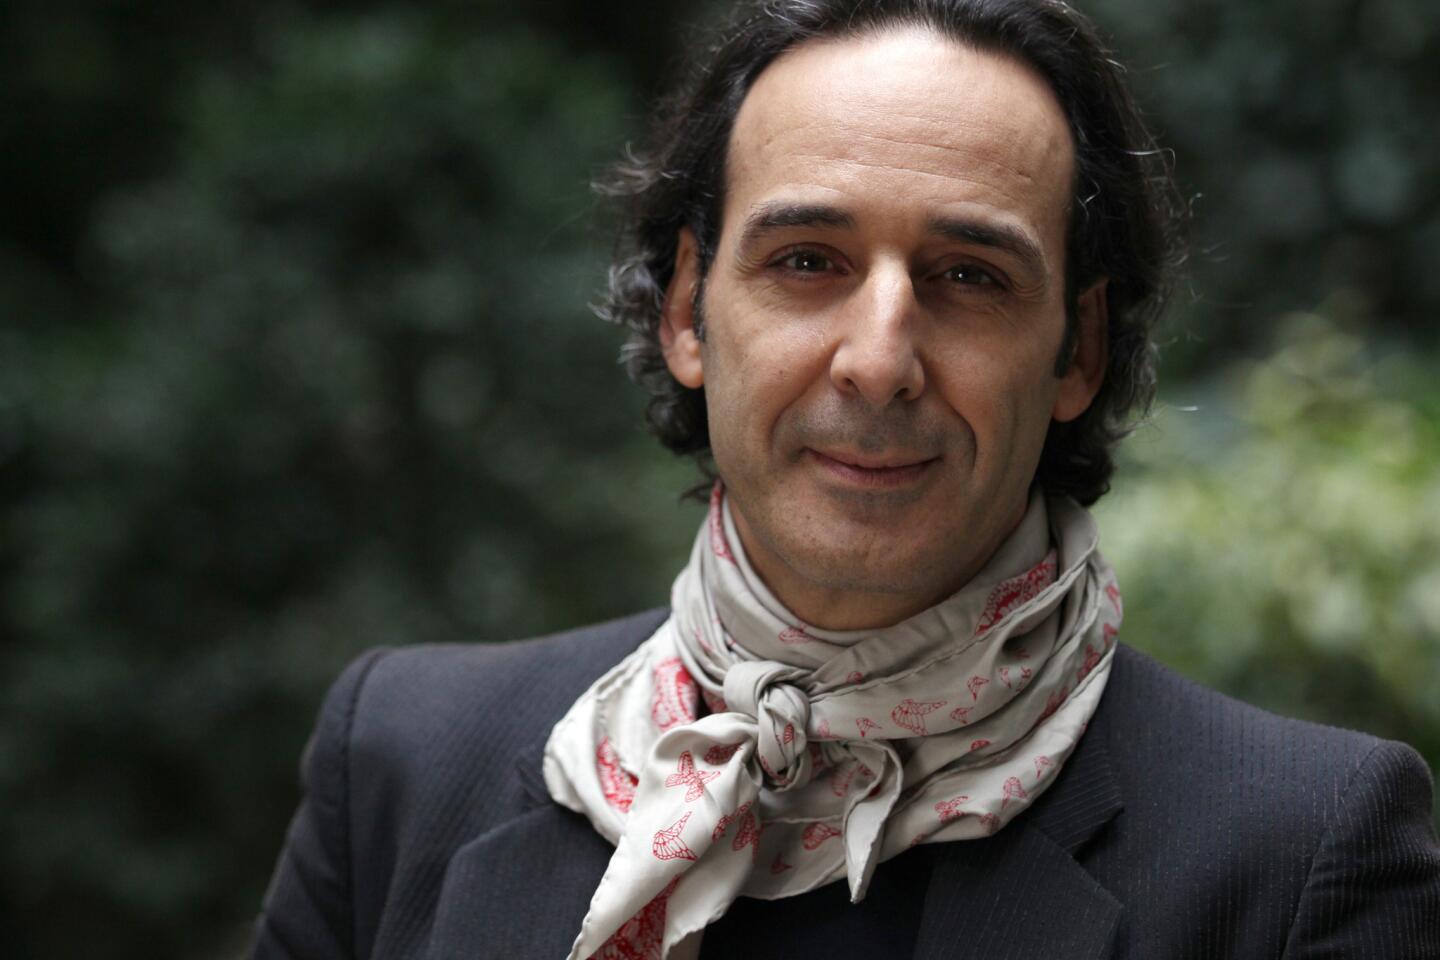 Nominee reactions | Alexandre Desplat, original score, 'The Grand Budapest Hotel' and 'The Imitation Game'